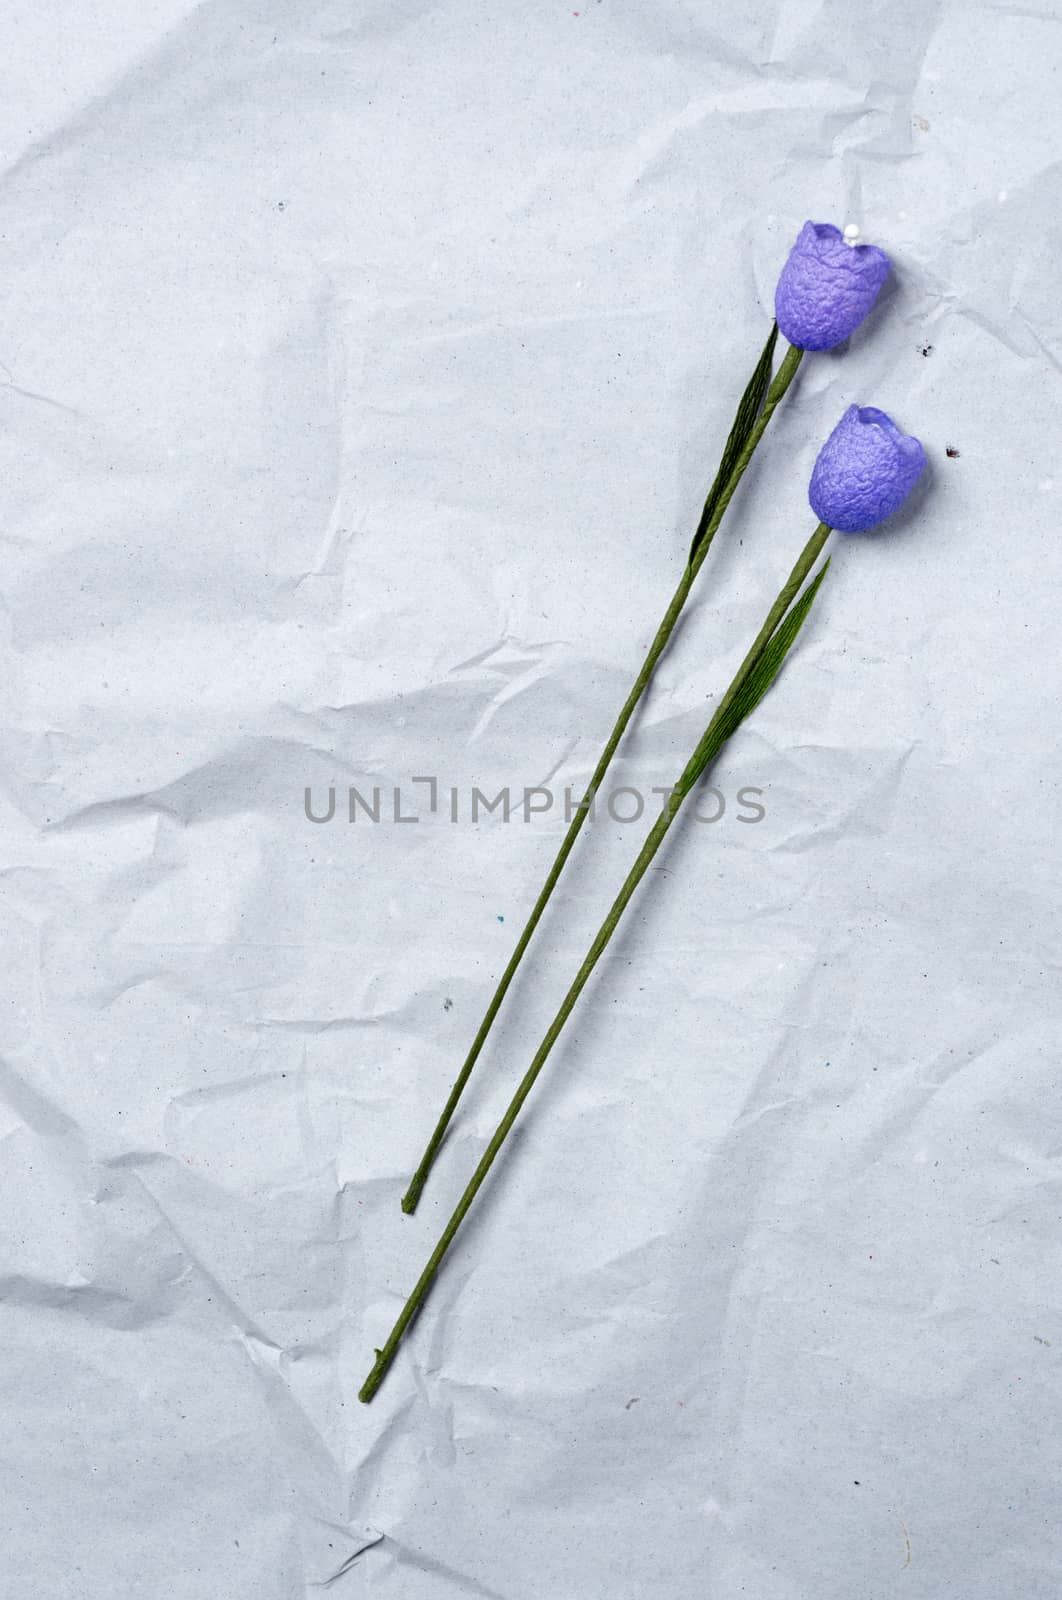 Two violet flowers on a recycled paper as a back ground.